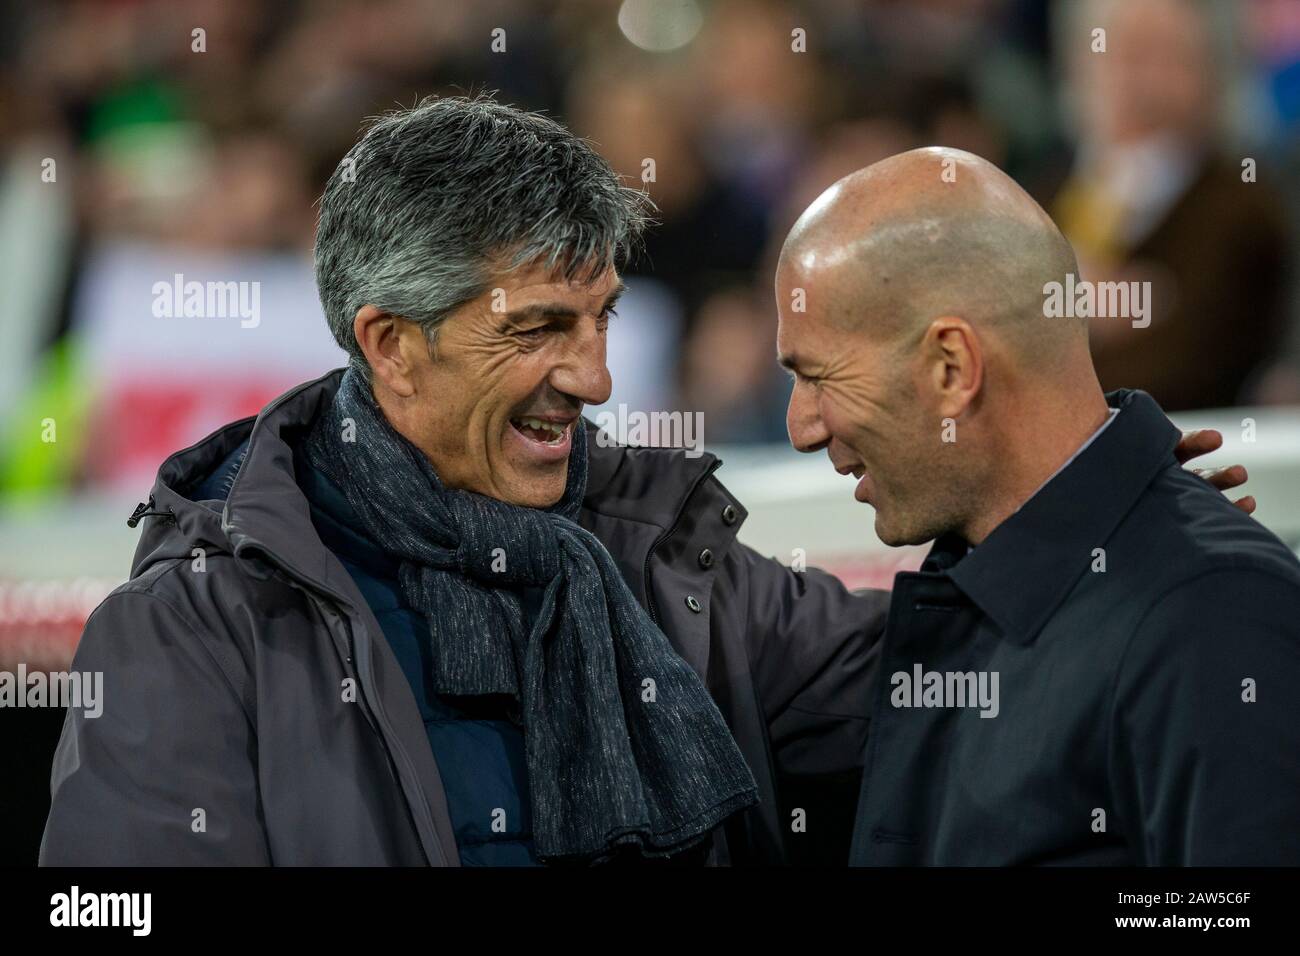 Real Sociedad's coach Imanol Alguacil and Real Madrid CF's Zinedine Zidane embrace each other before the Spanish quarterfinal Copa del Rey match between Real Madrid and Real Sociedad at Santiago Bernabeu Stadium in Madrid.(Final score; Real Madrid 3:4 Real Sociedad) Stock Photo